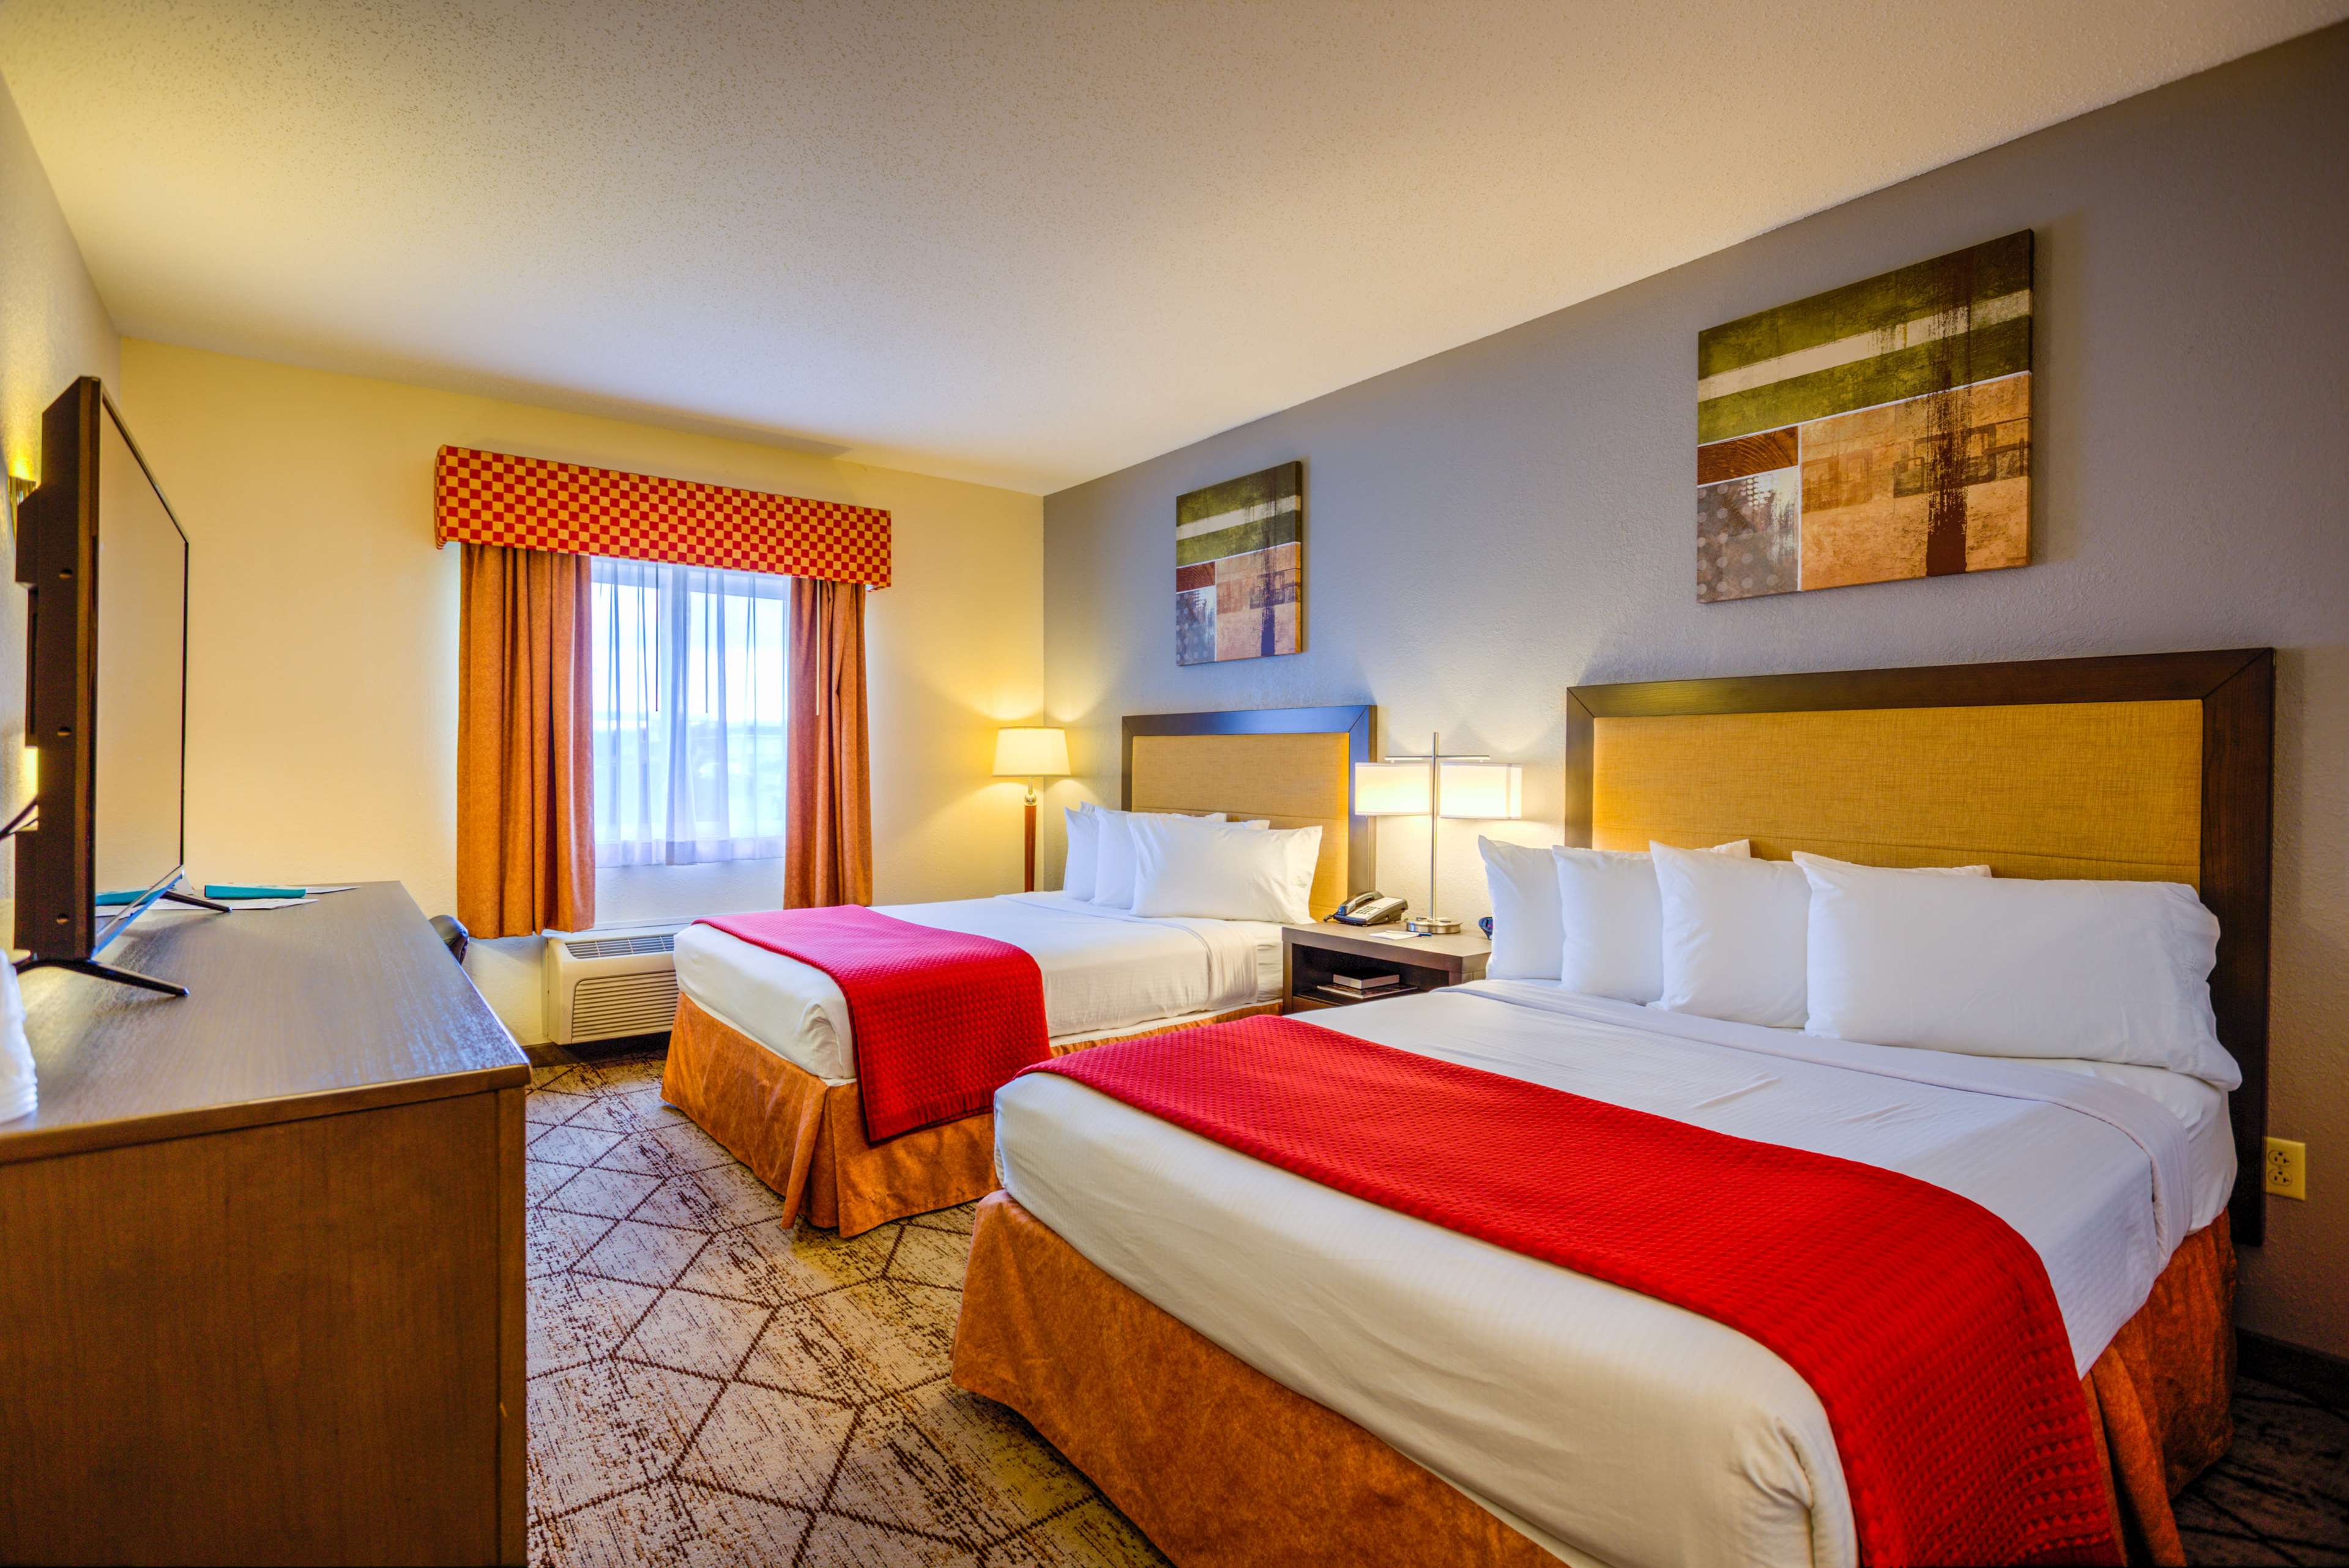 End your day in comfort with our well-appointed guest rooms, with microwave and refrigerator